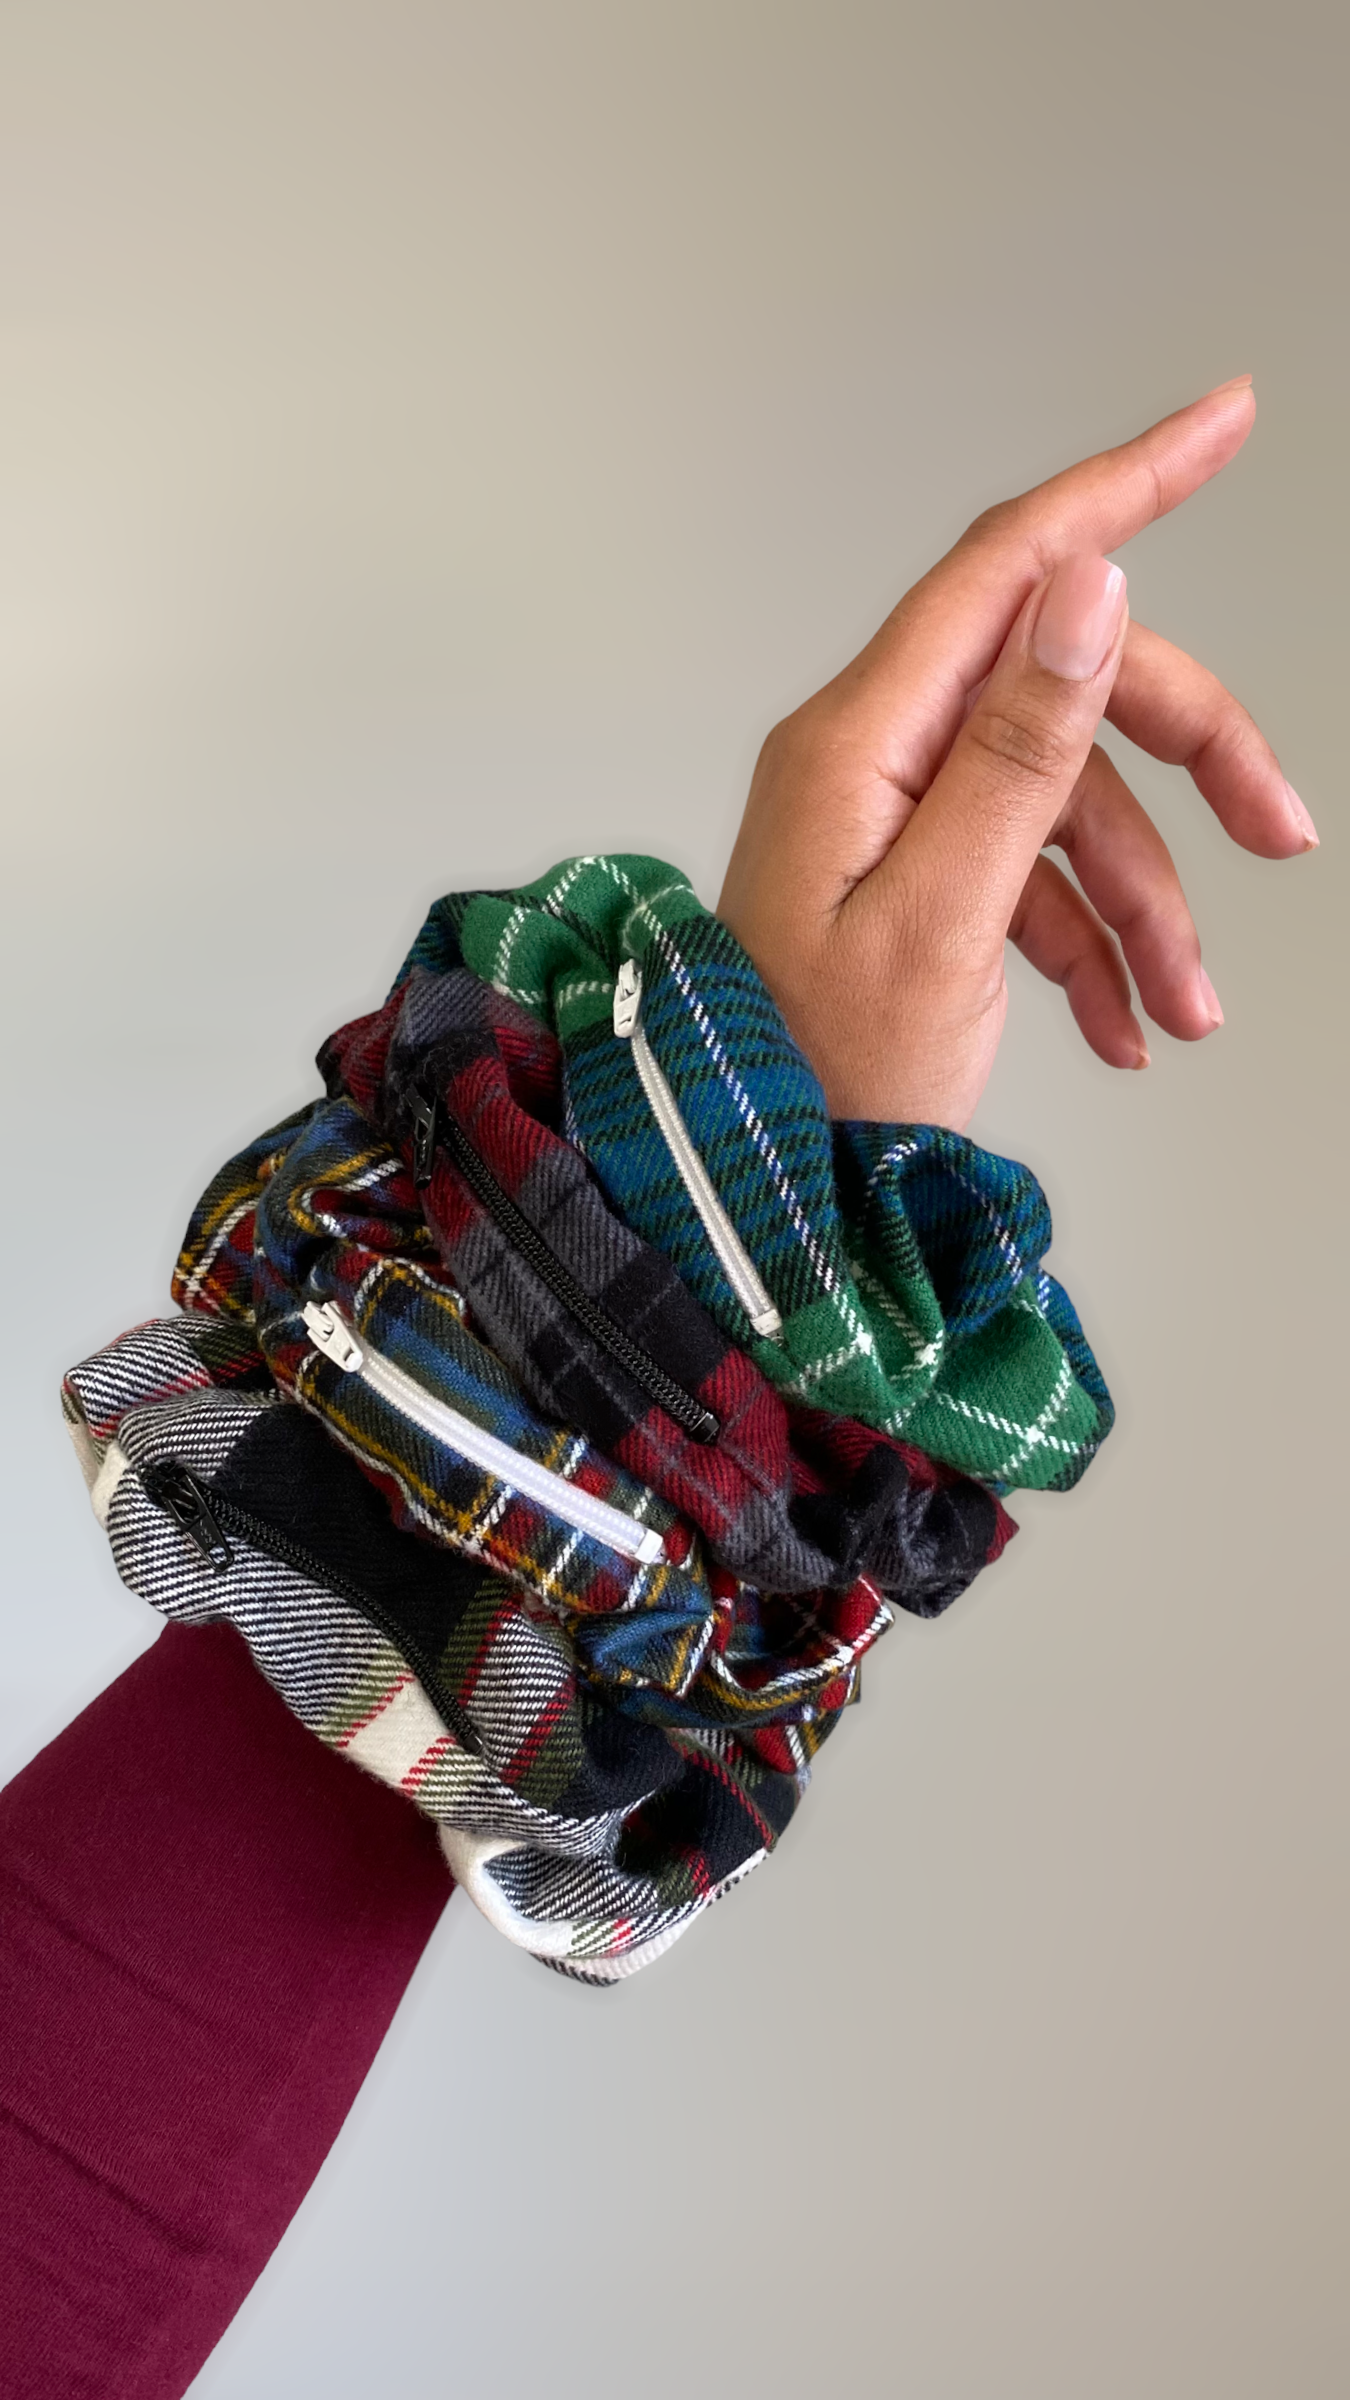 Handmade large oversized scrunchies in plaid with hidden zipper for small items.